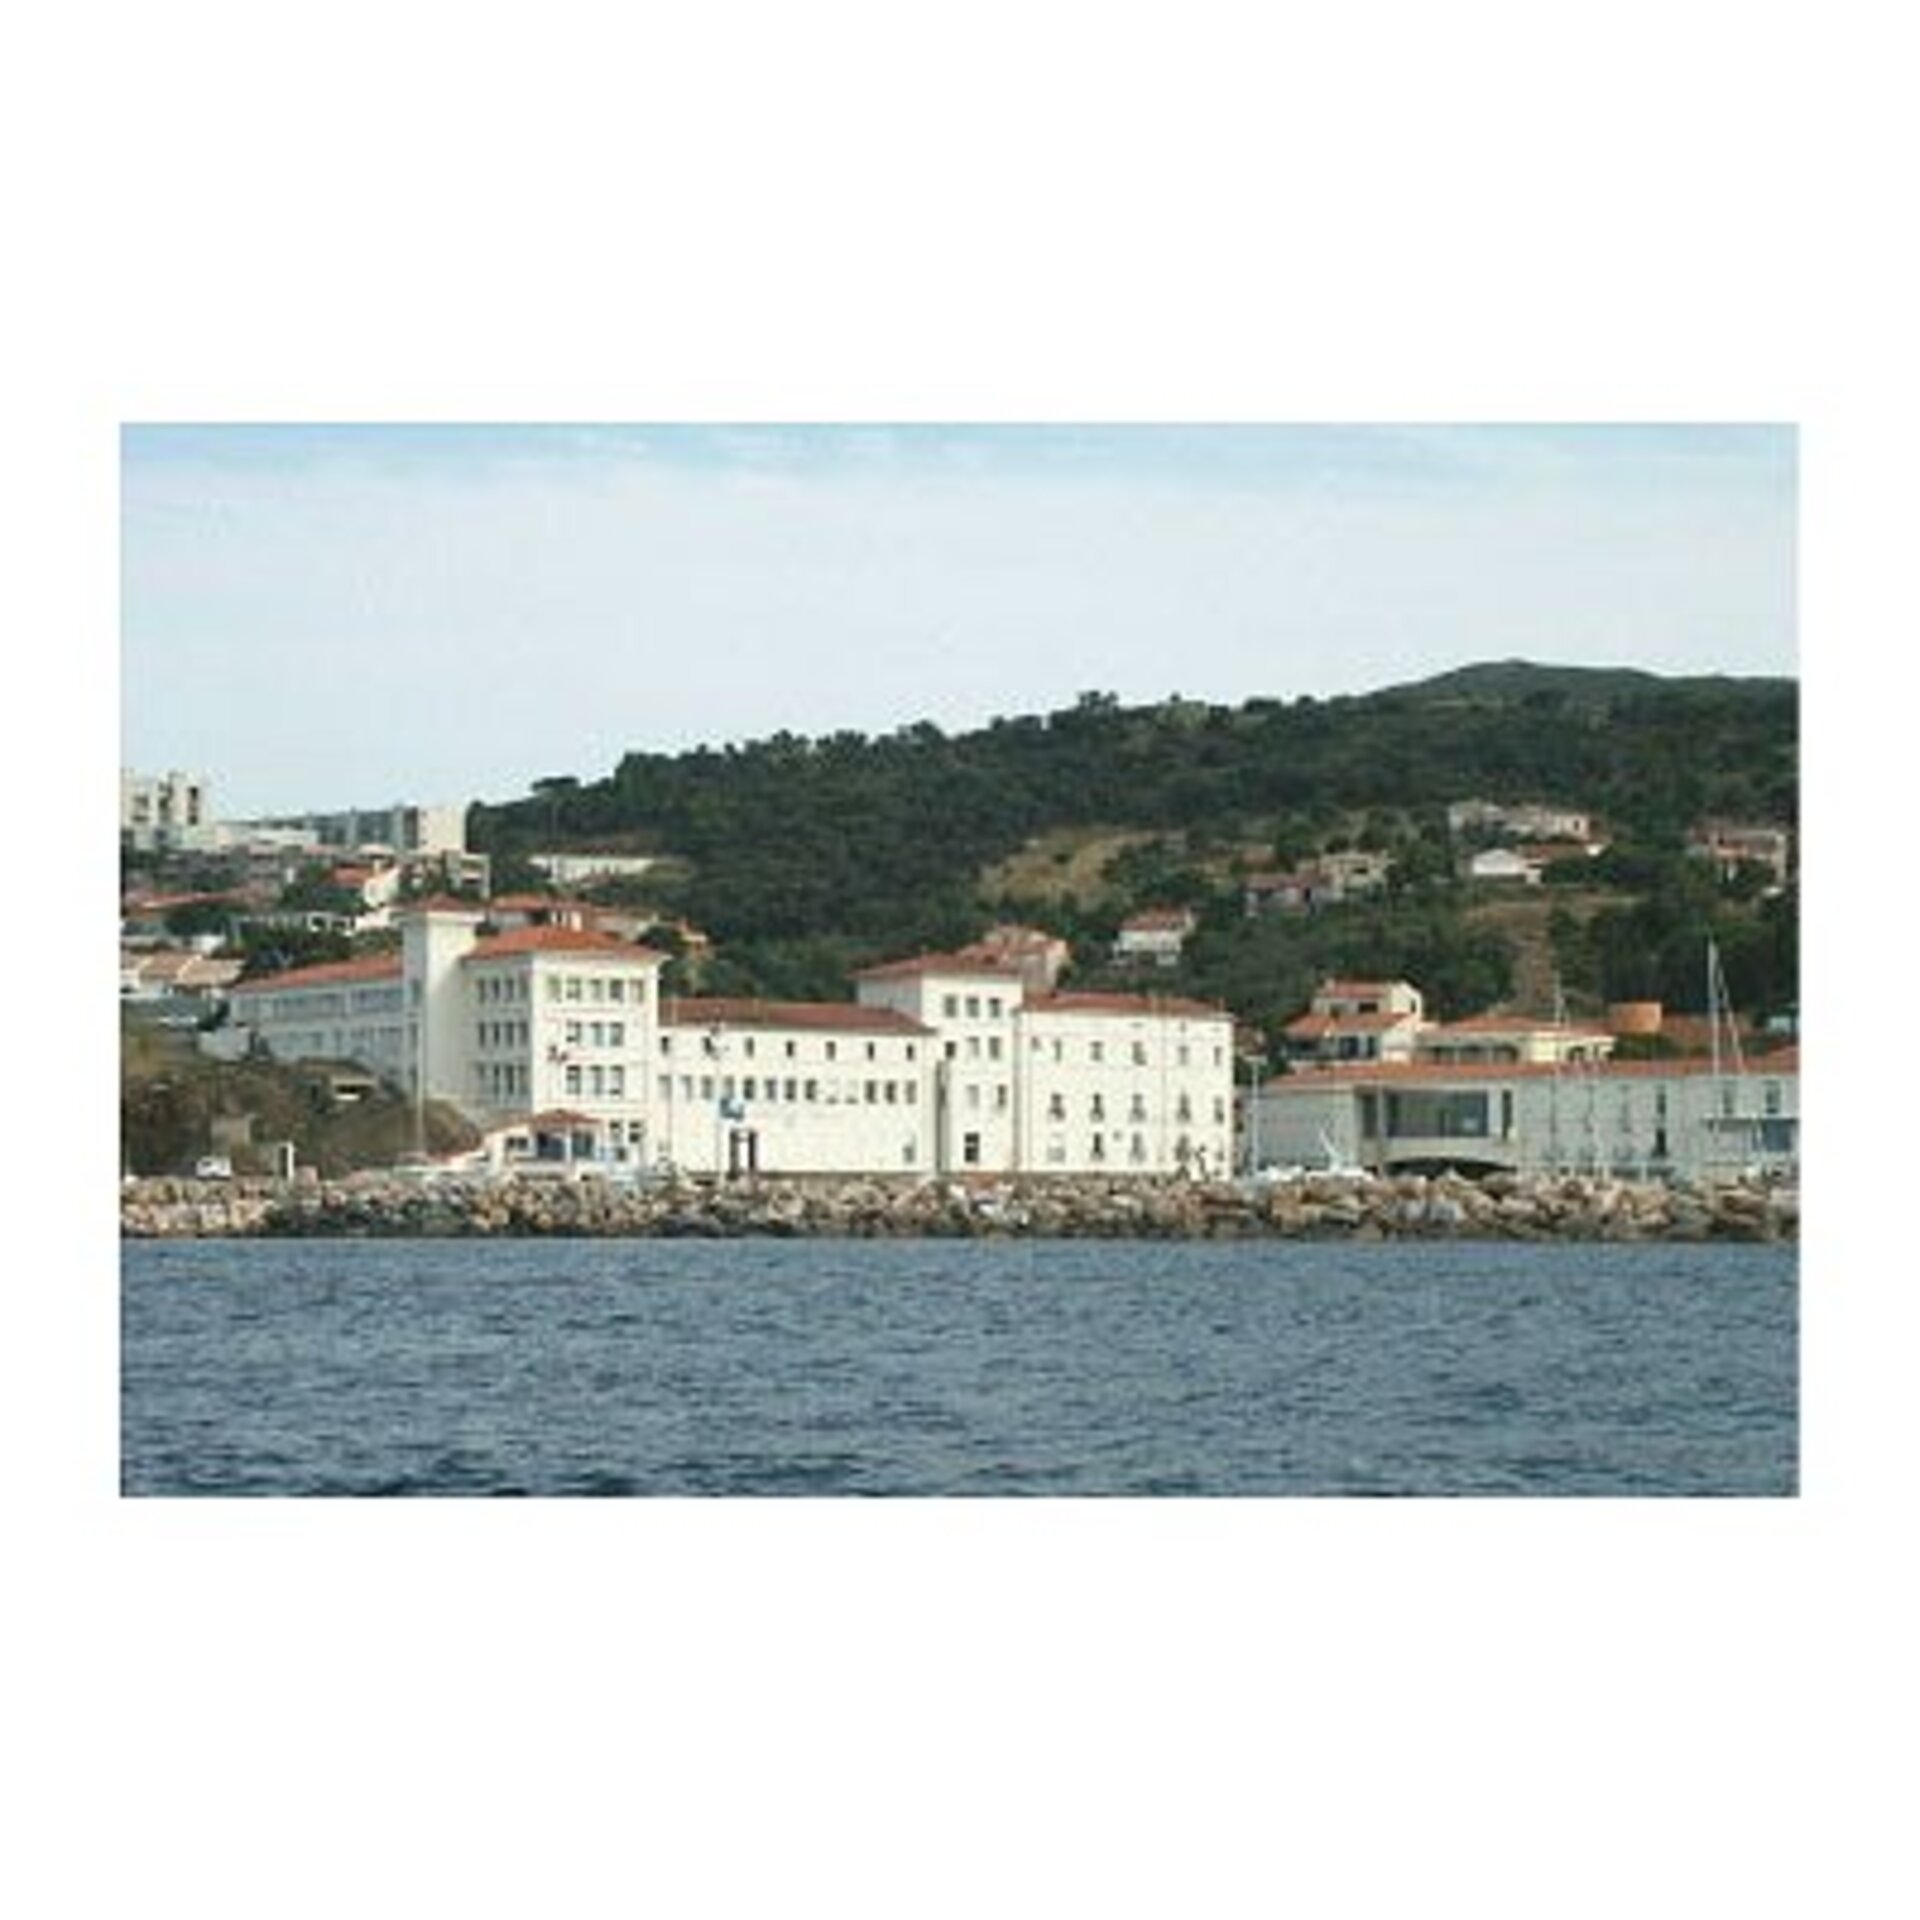 The programme is hosted by the Oceanological Observatory in Banyuls-sur-Mer